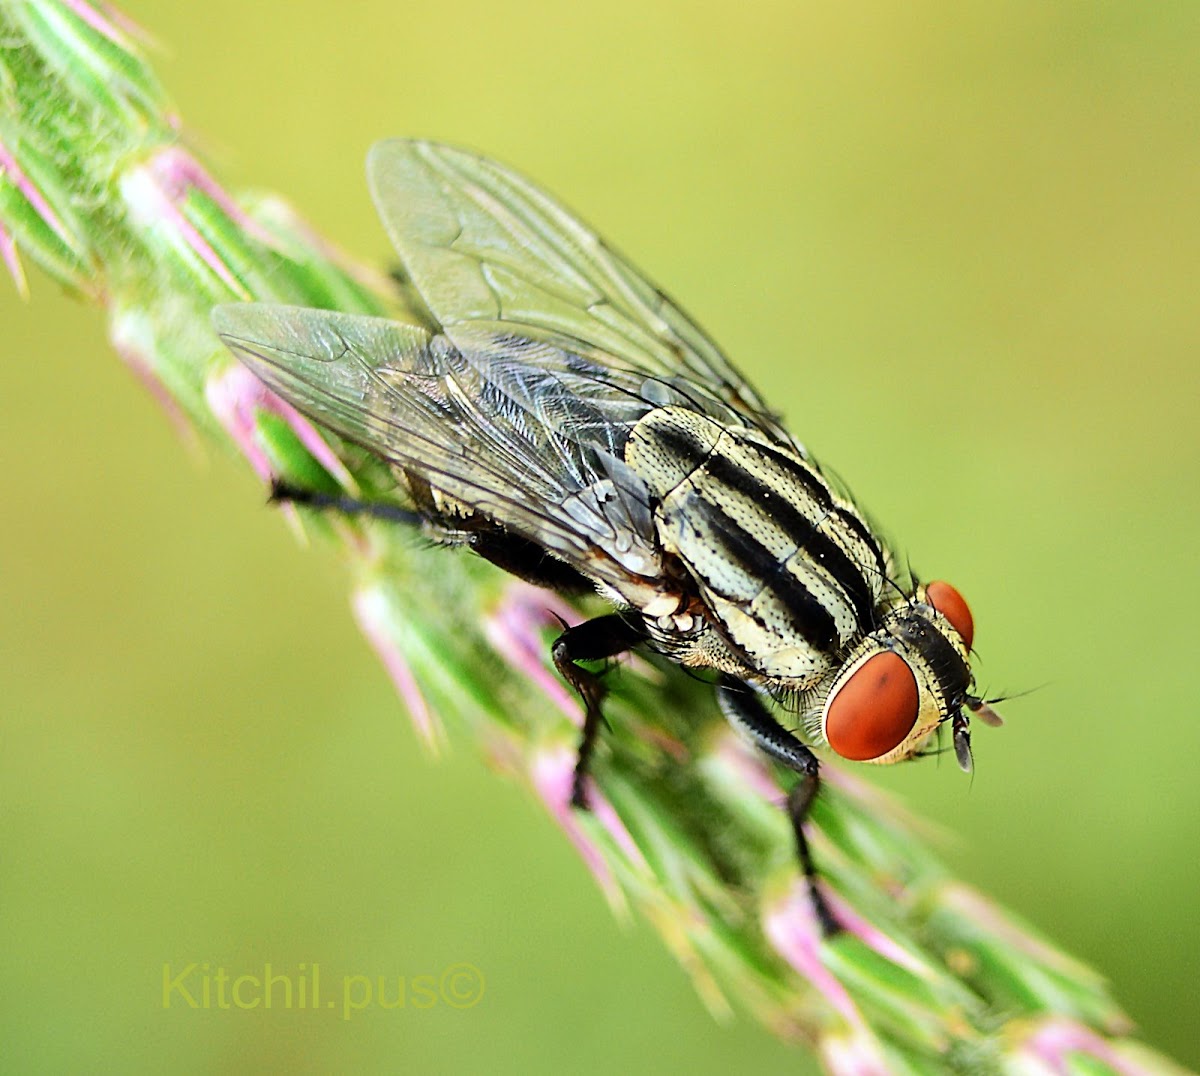 Stable fly